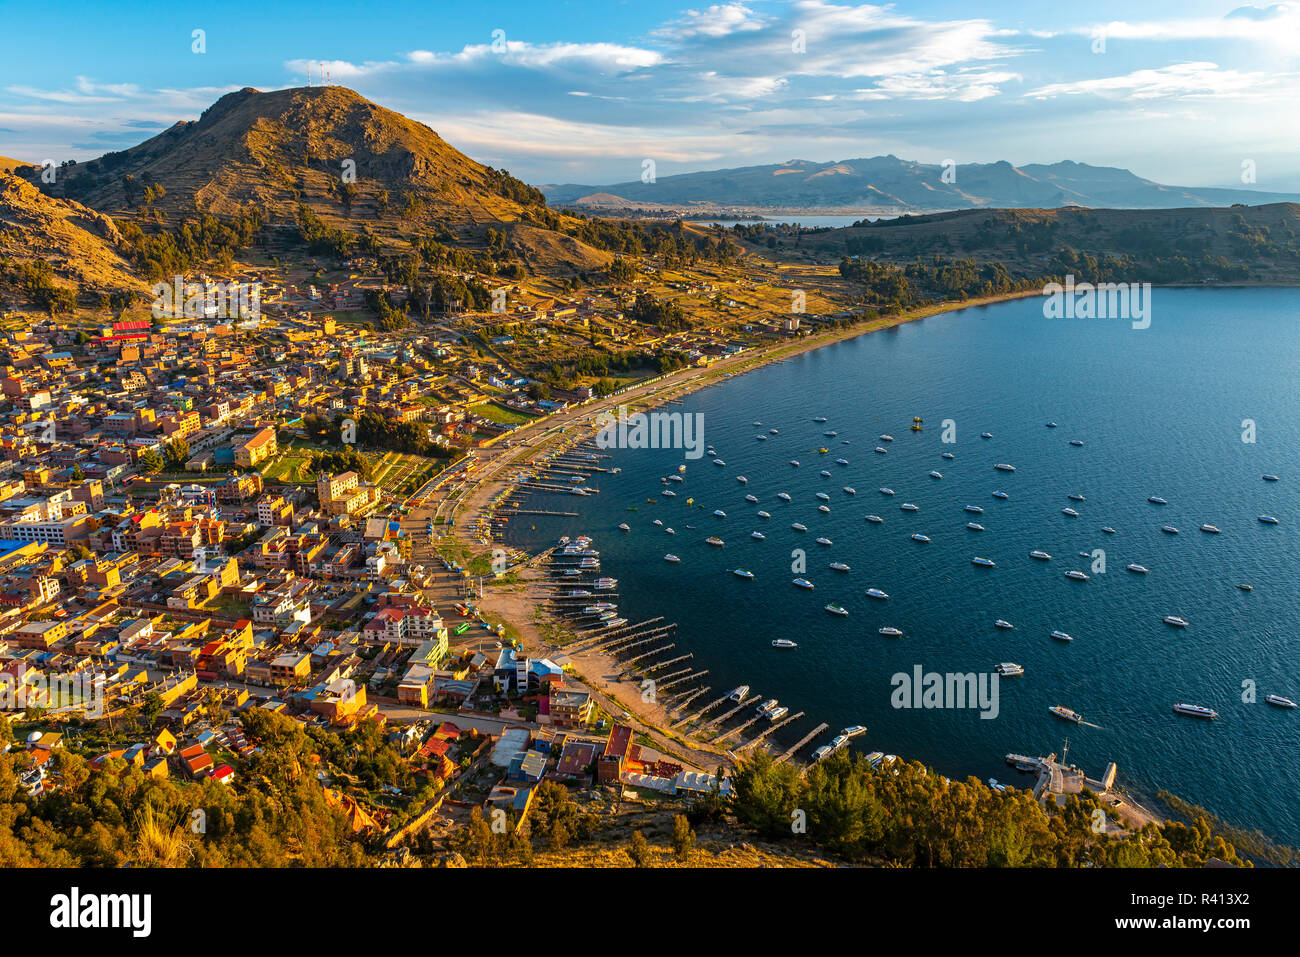 The cityscape of Copacabana city by the Titicaca Lake at sunset, Bolivia. Stock Photo